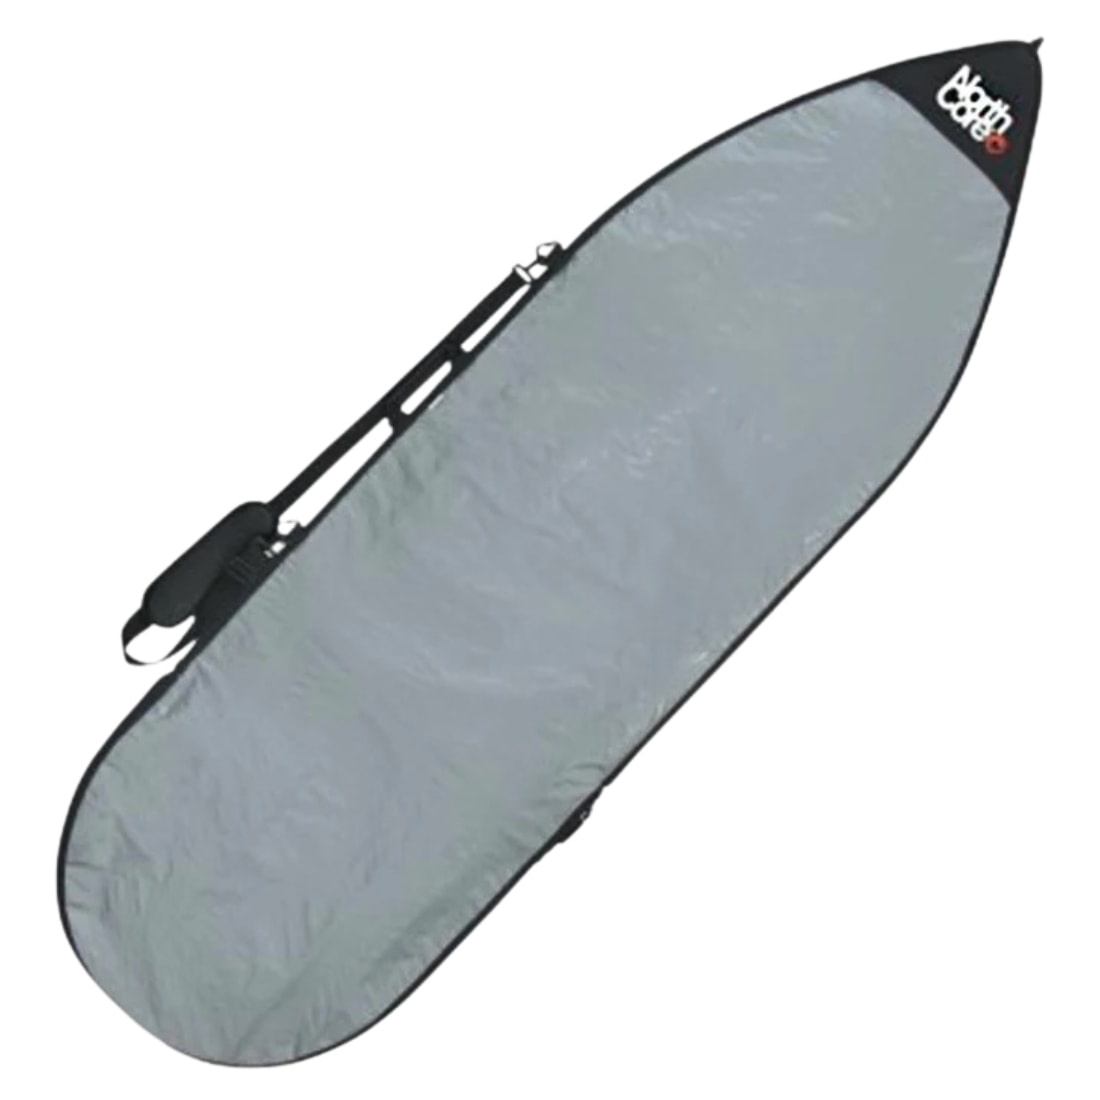 Northcore 6&#39;4 Addiction Shortboard/Fish Surfboard Bag - Silver - Surfboard Day Runner Bag/Cover by Northcore 6ft 4